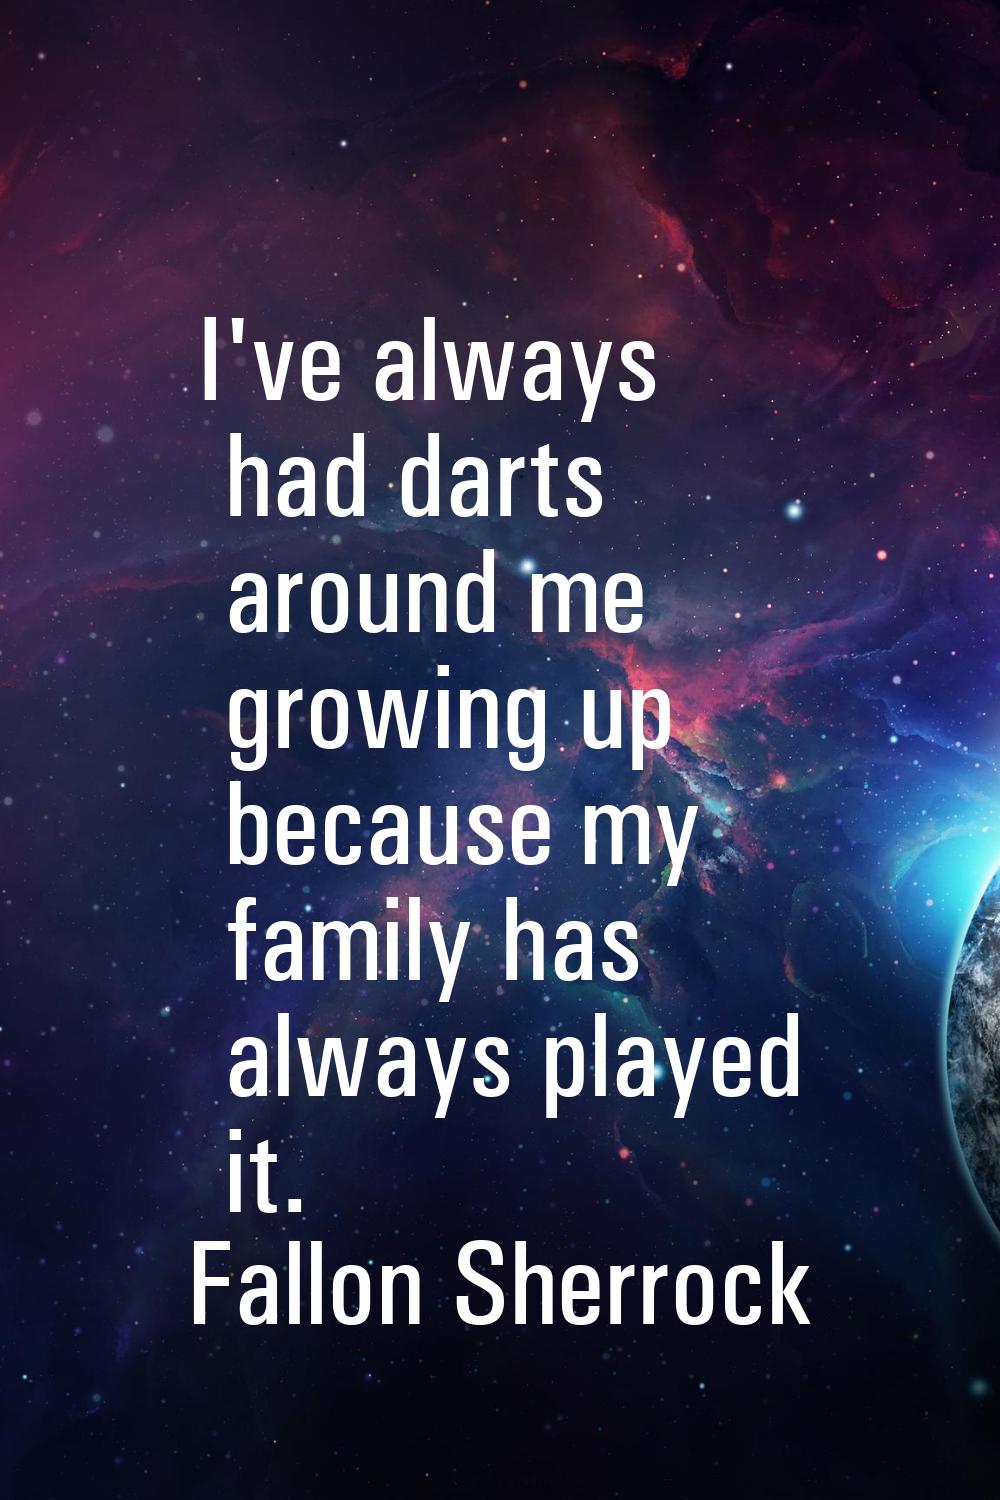 I've always had darts around me growing up because my family has always played it.